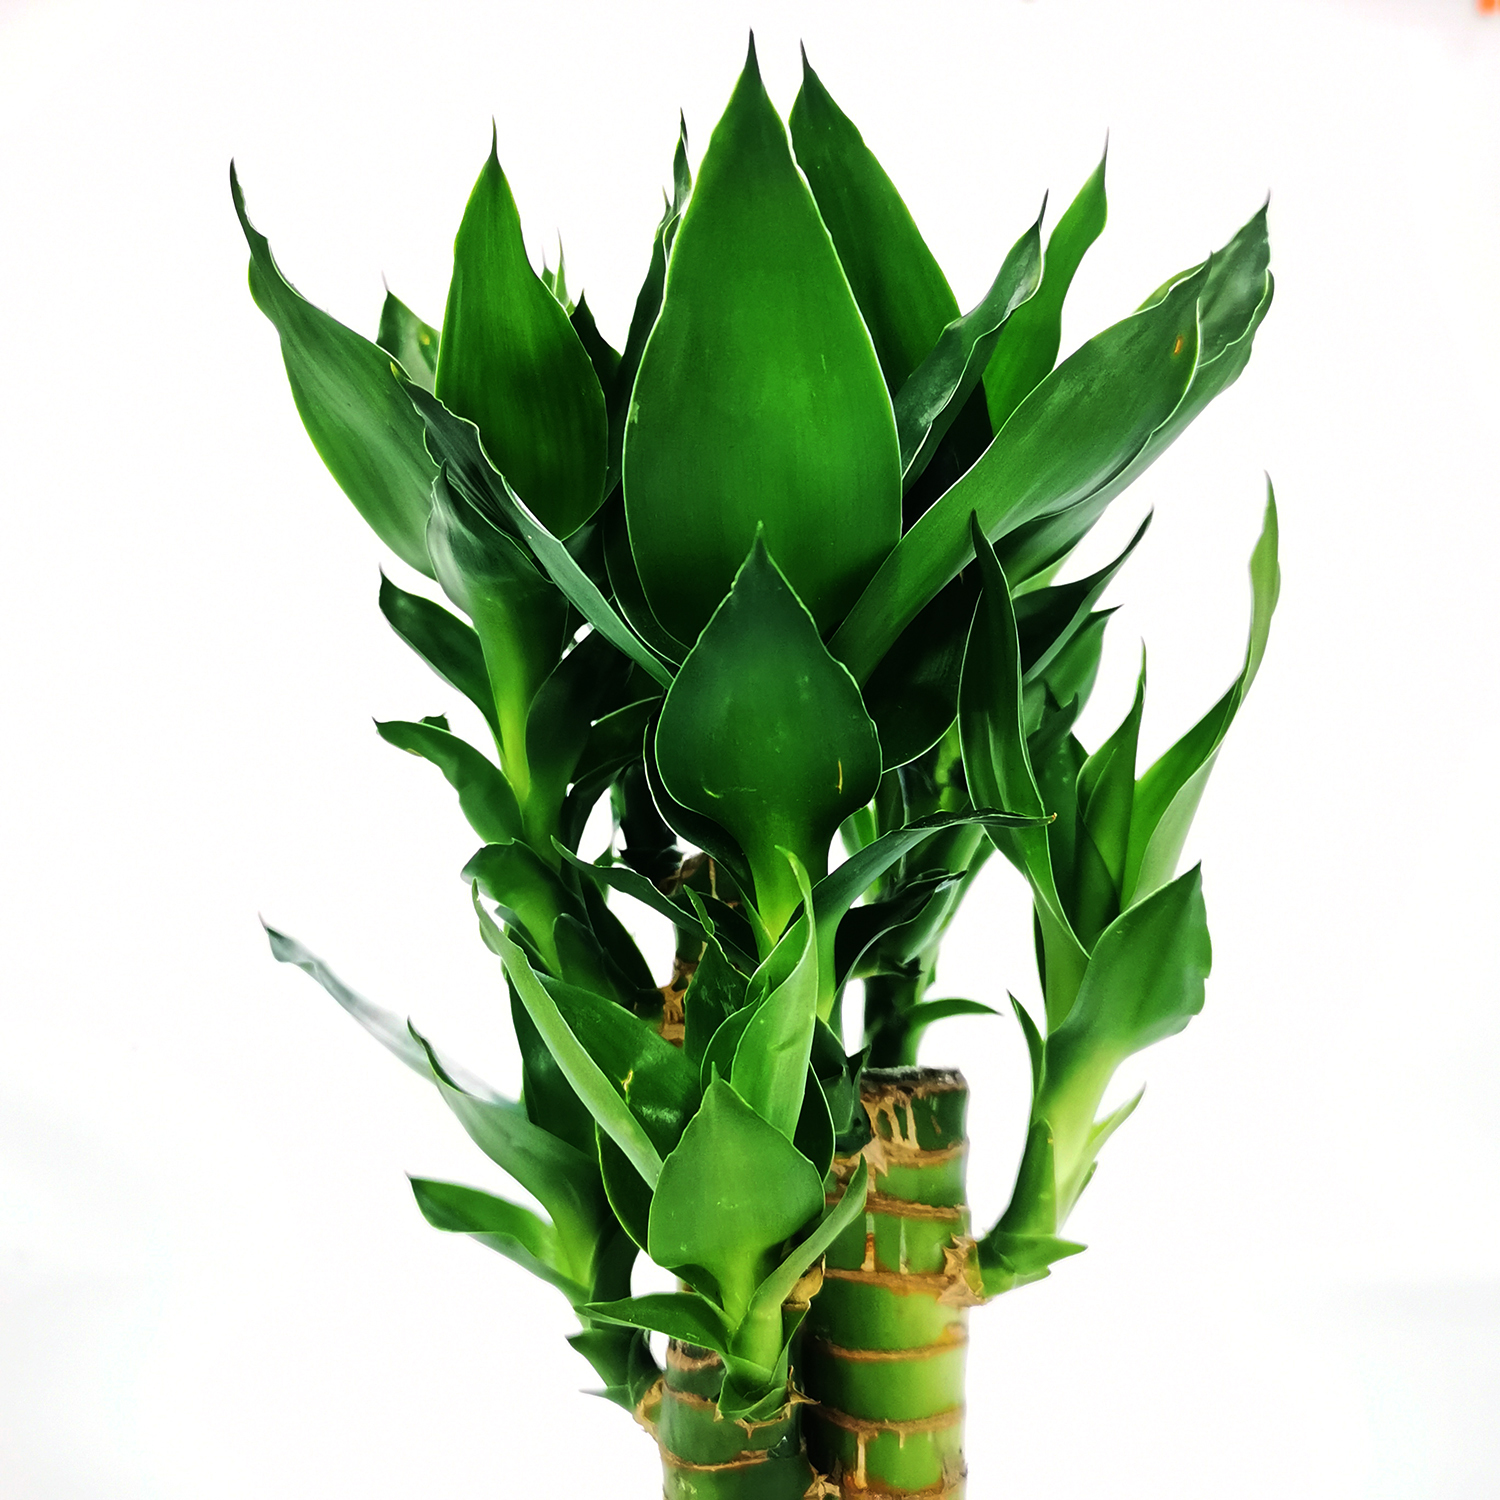  3 in 1 Lotus Bamboo Wholesale Lucky Bamboo Bonsai Live Plants Nursery Wholesale  